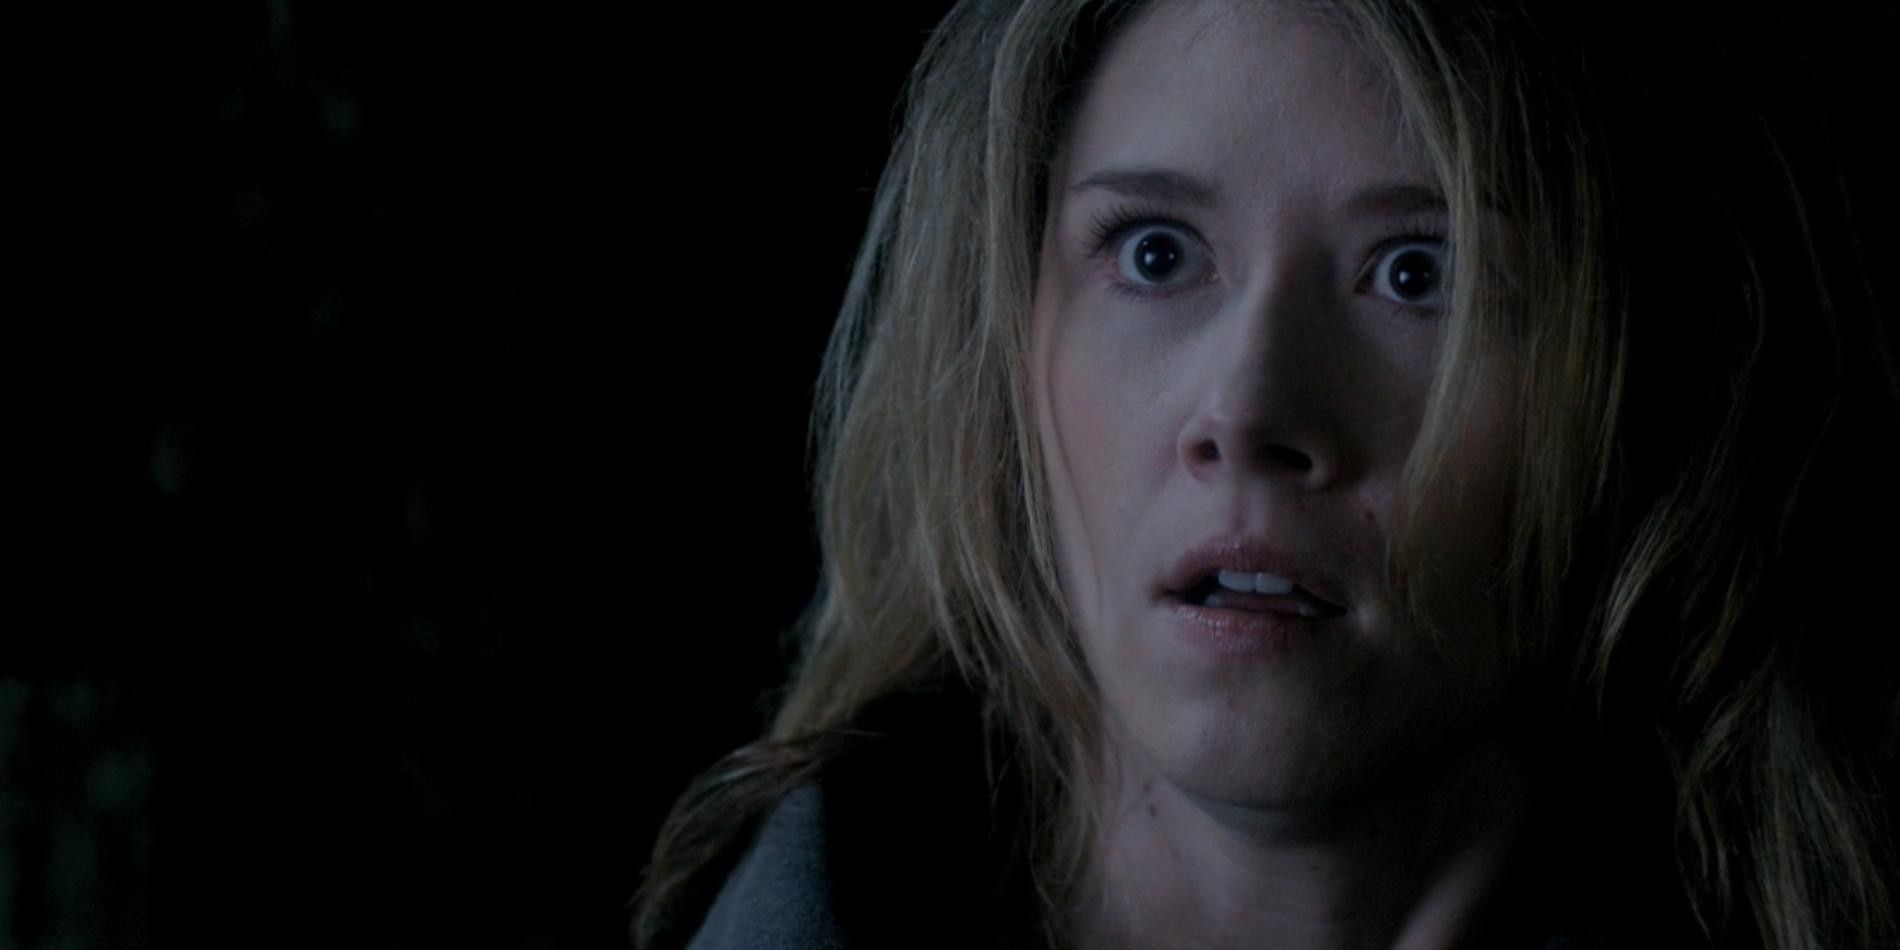 Jewel Staite as Amy Pond in Supernatural